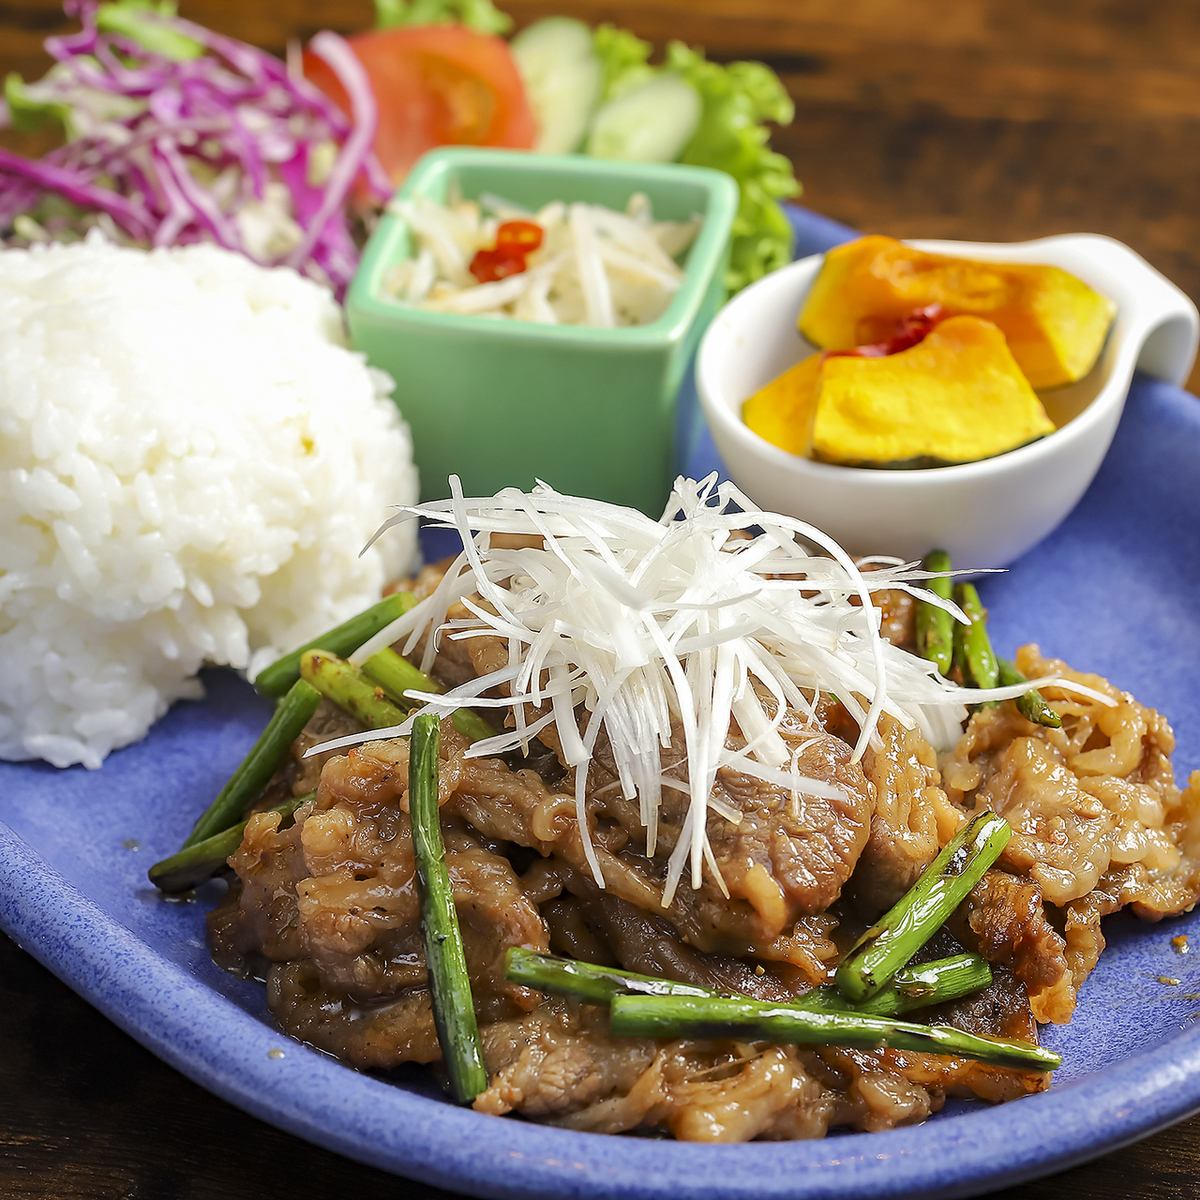 We recommend the luxurious plate lunch starting at 1,200 yen including tax.